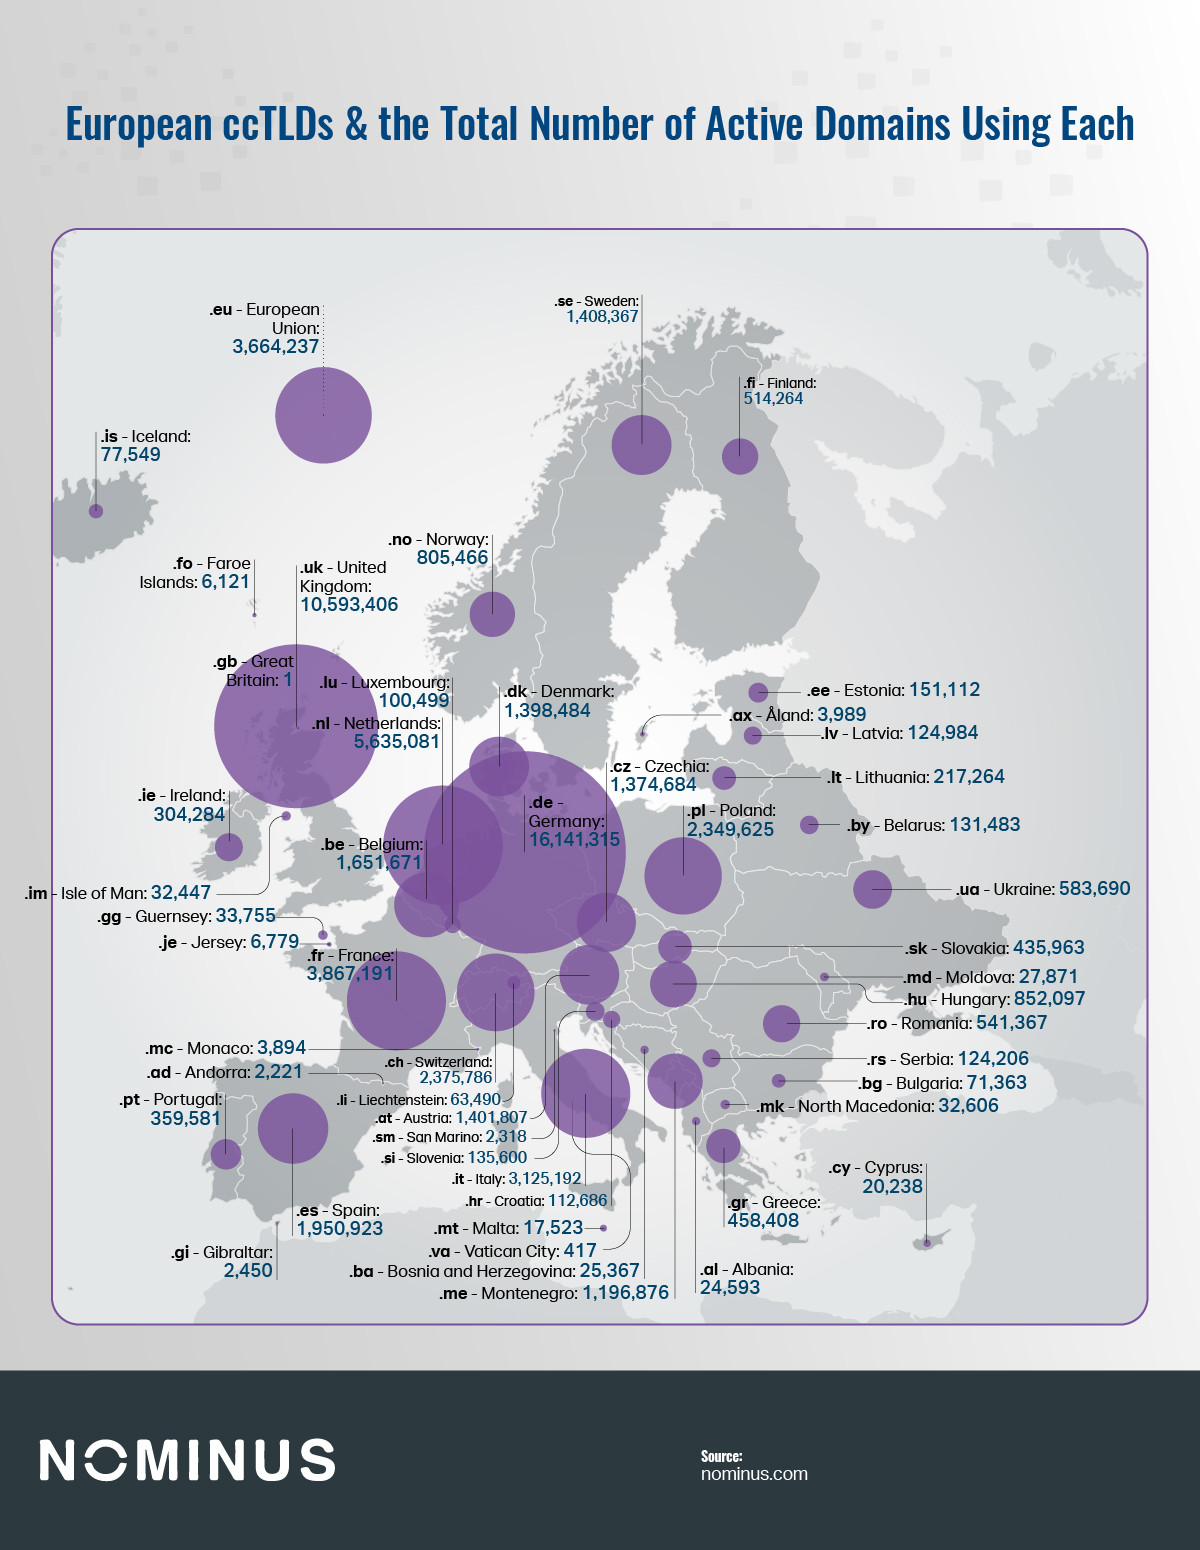 blande Konsultation synder Which Countries Have the Most Popular Top-Level Domains in the World?